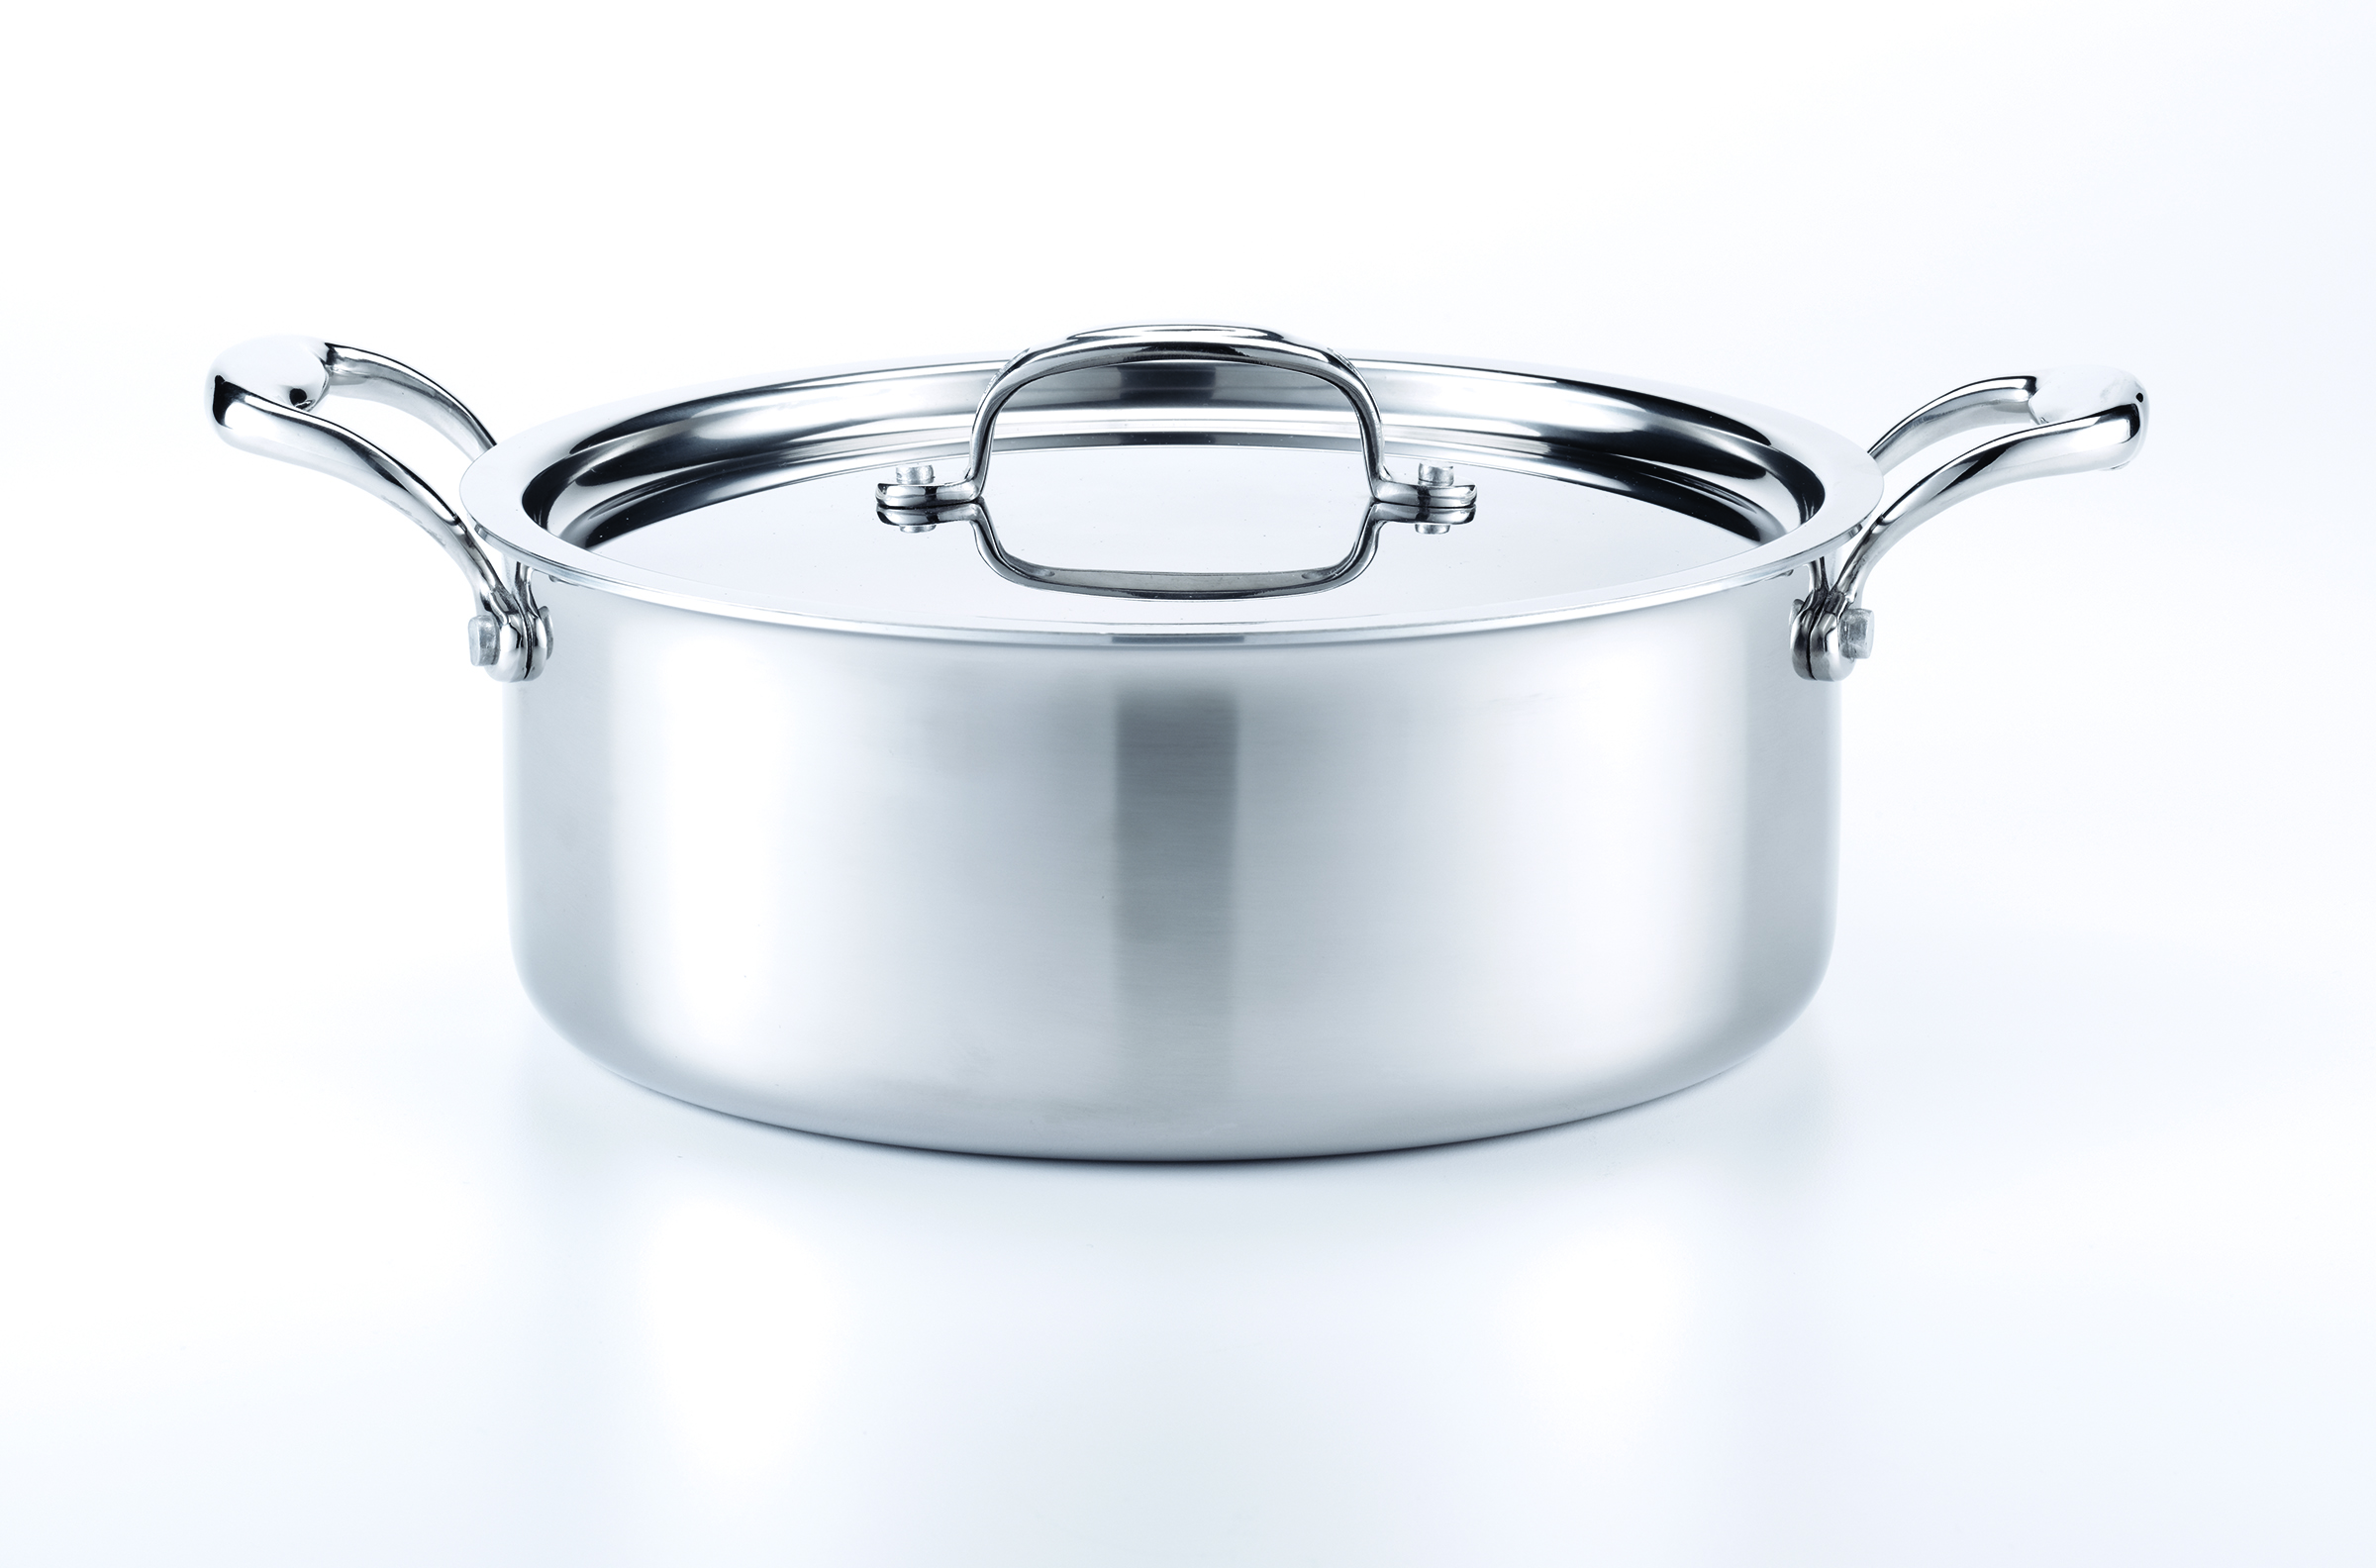 Hammer Stahl Cookware: Stainless Steel Made in the USA - Kitchenware News &  Housewares ReviewKitchenware News & Housewares Review